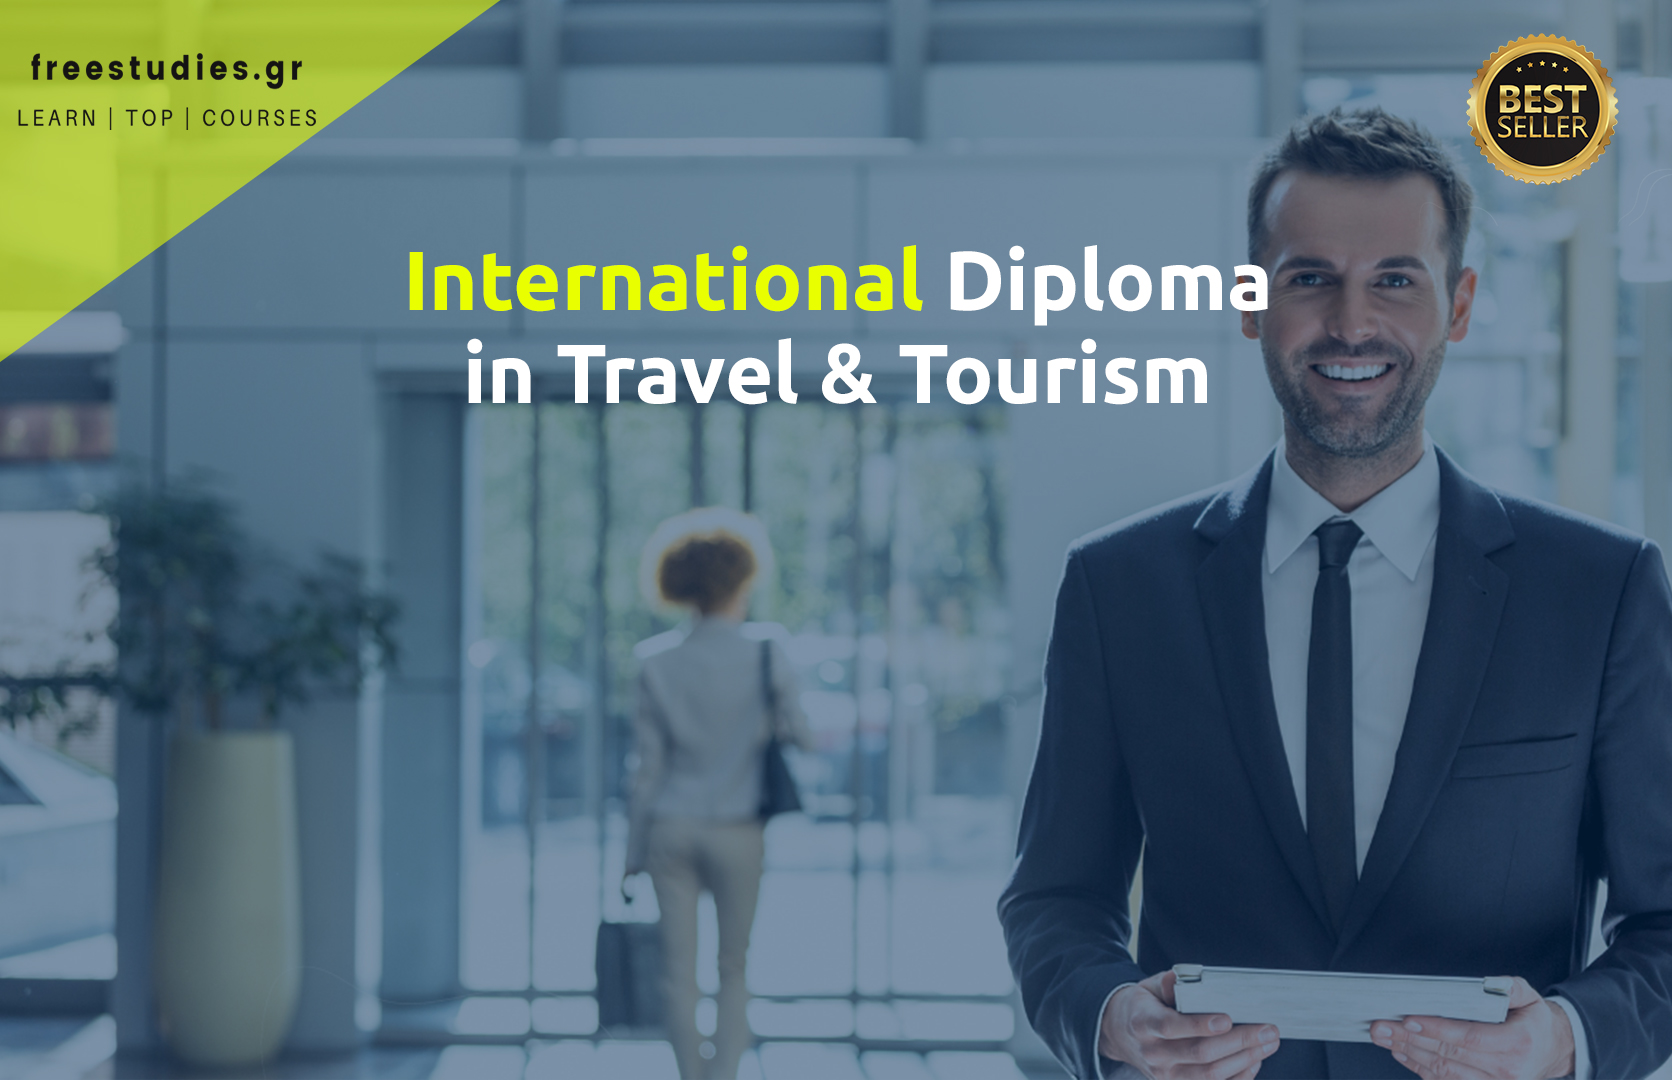 Vellum International Diploma in Travel and Tourism